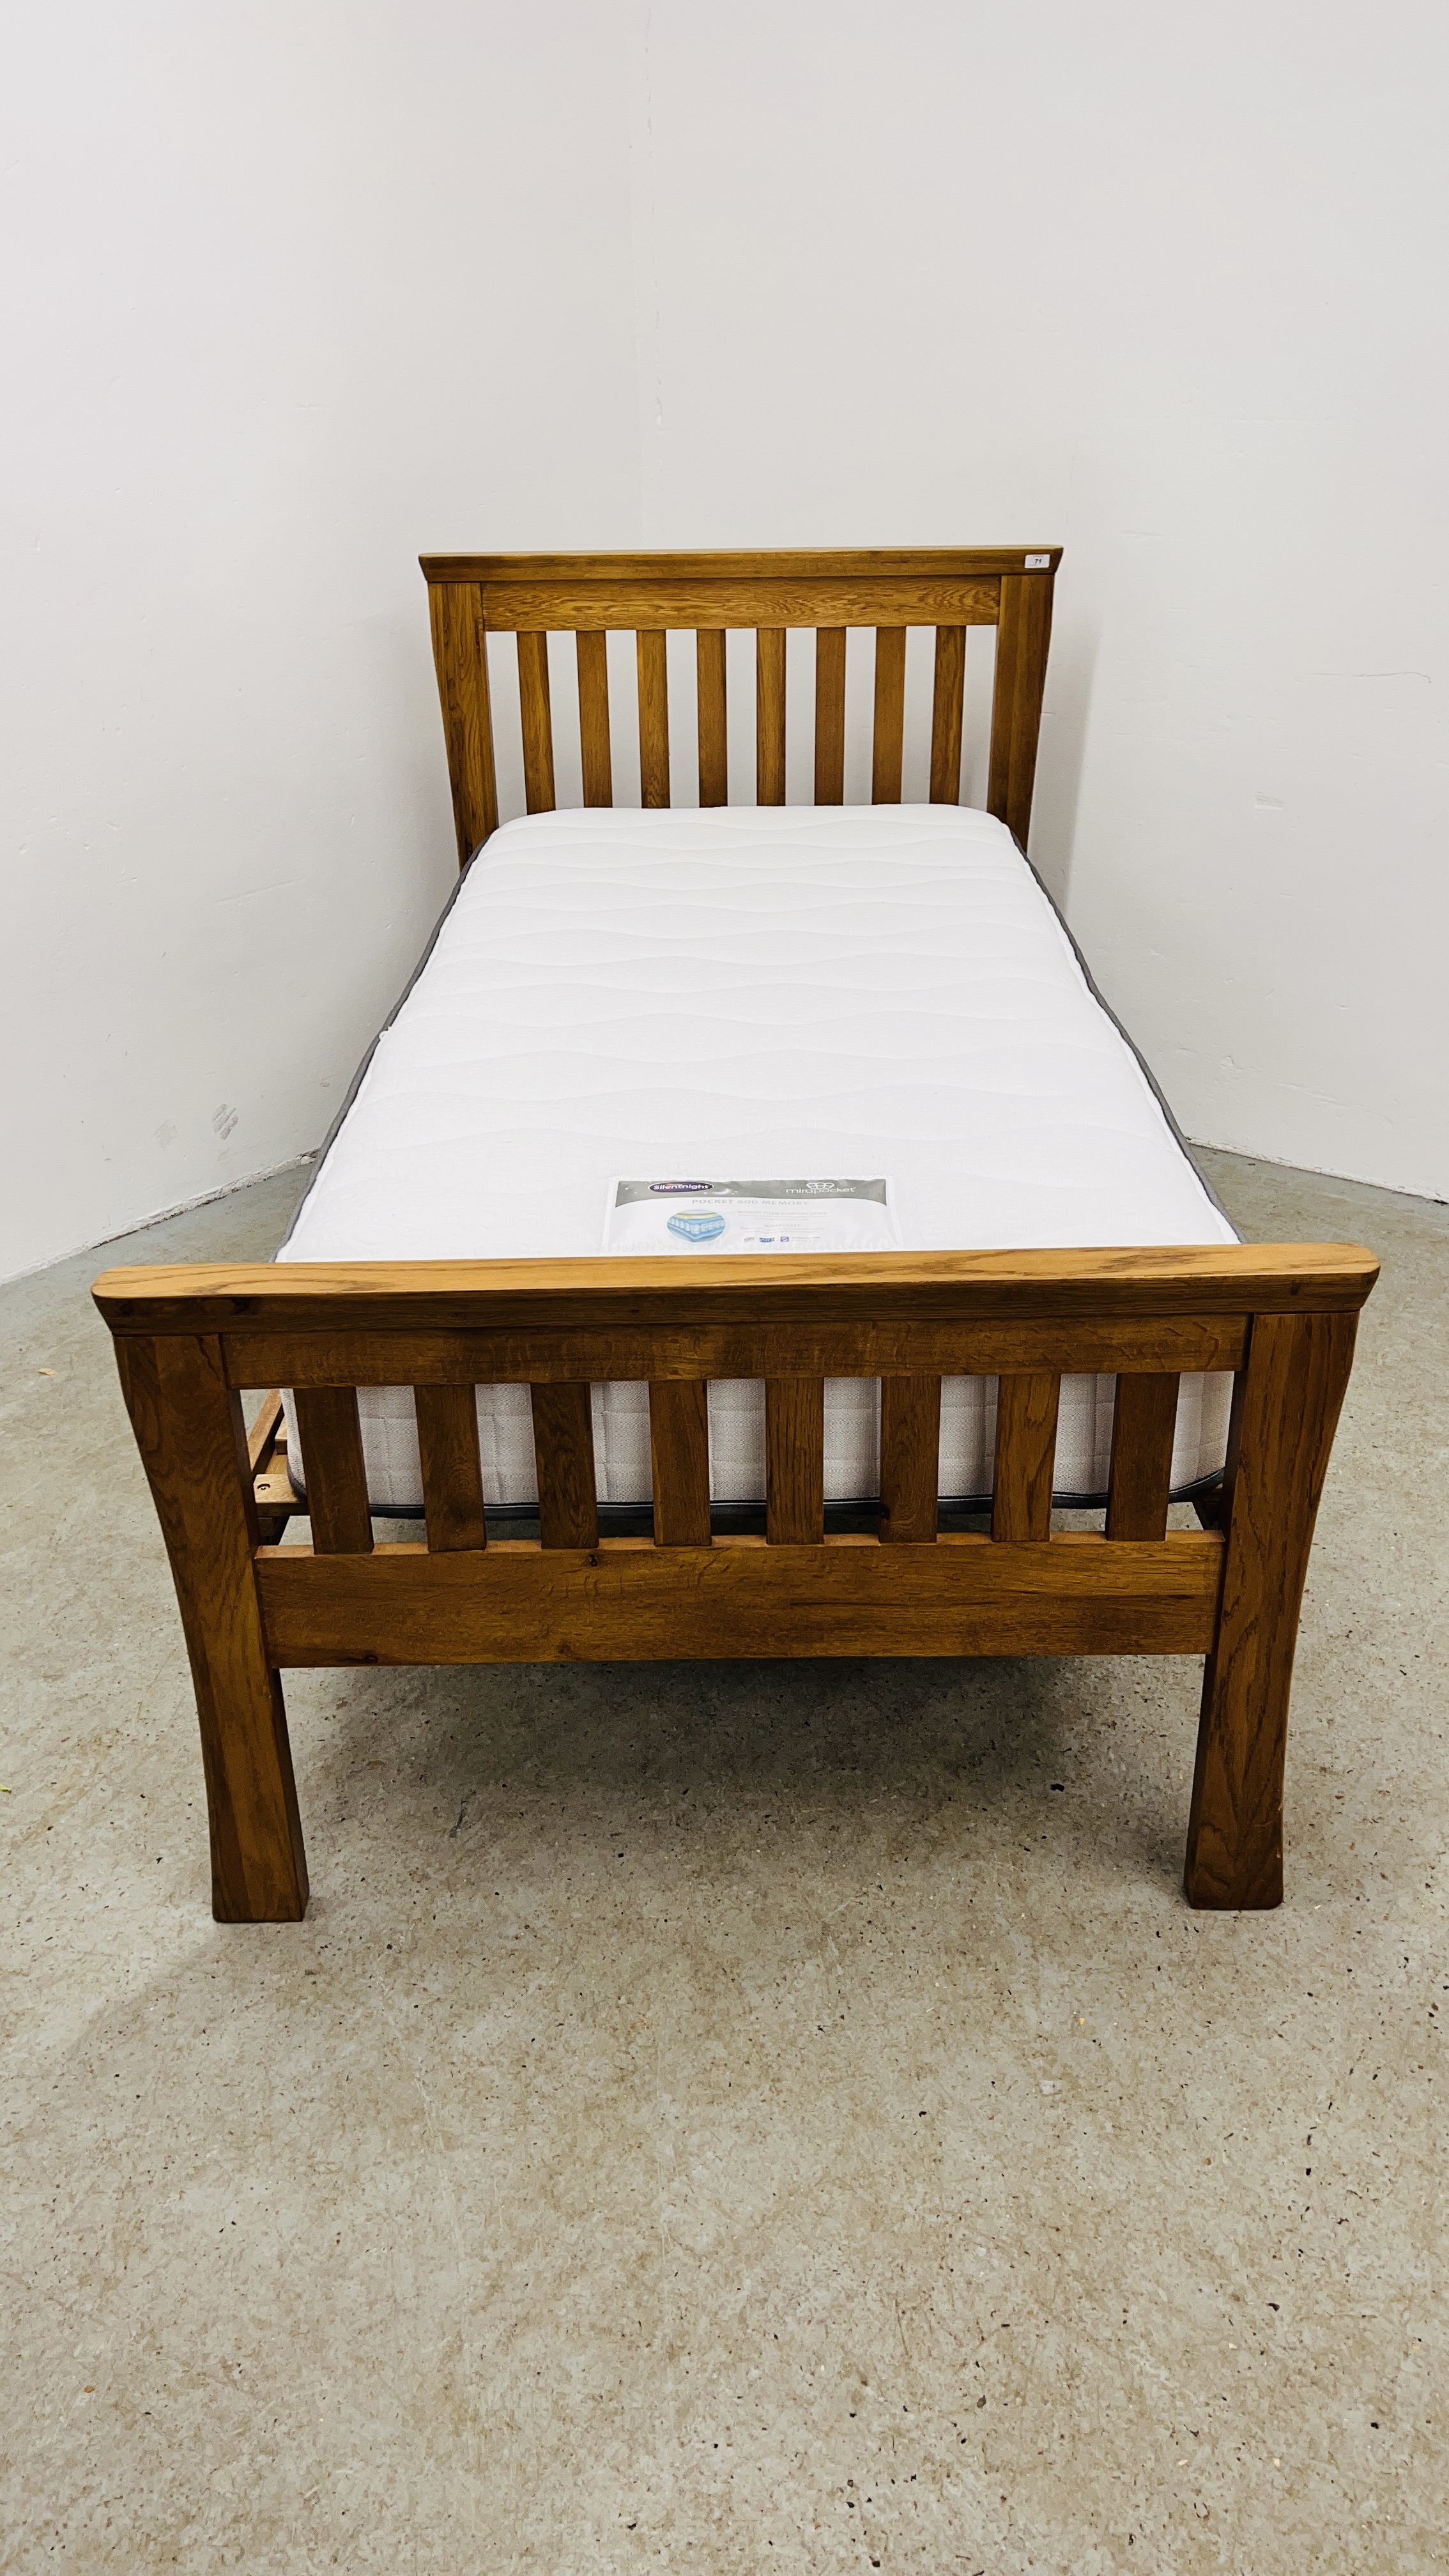 A GOOD QUALITY SOLID OAK SINGLE BED FRAME WITH SILENTNIGHT MIRROR POCKET 800 MEMORY MATTRESS.